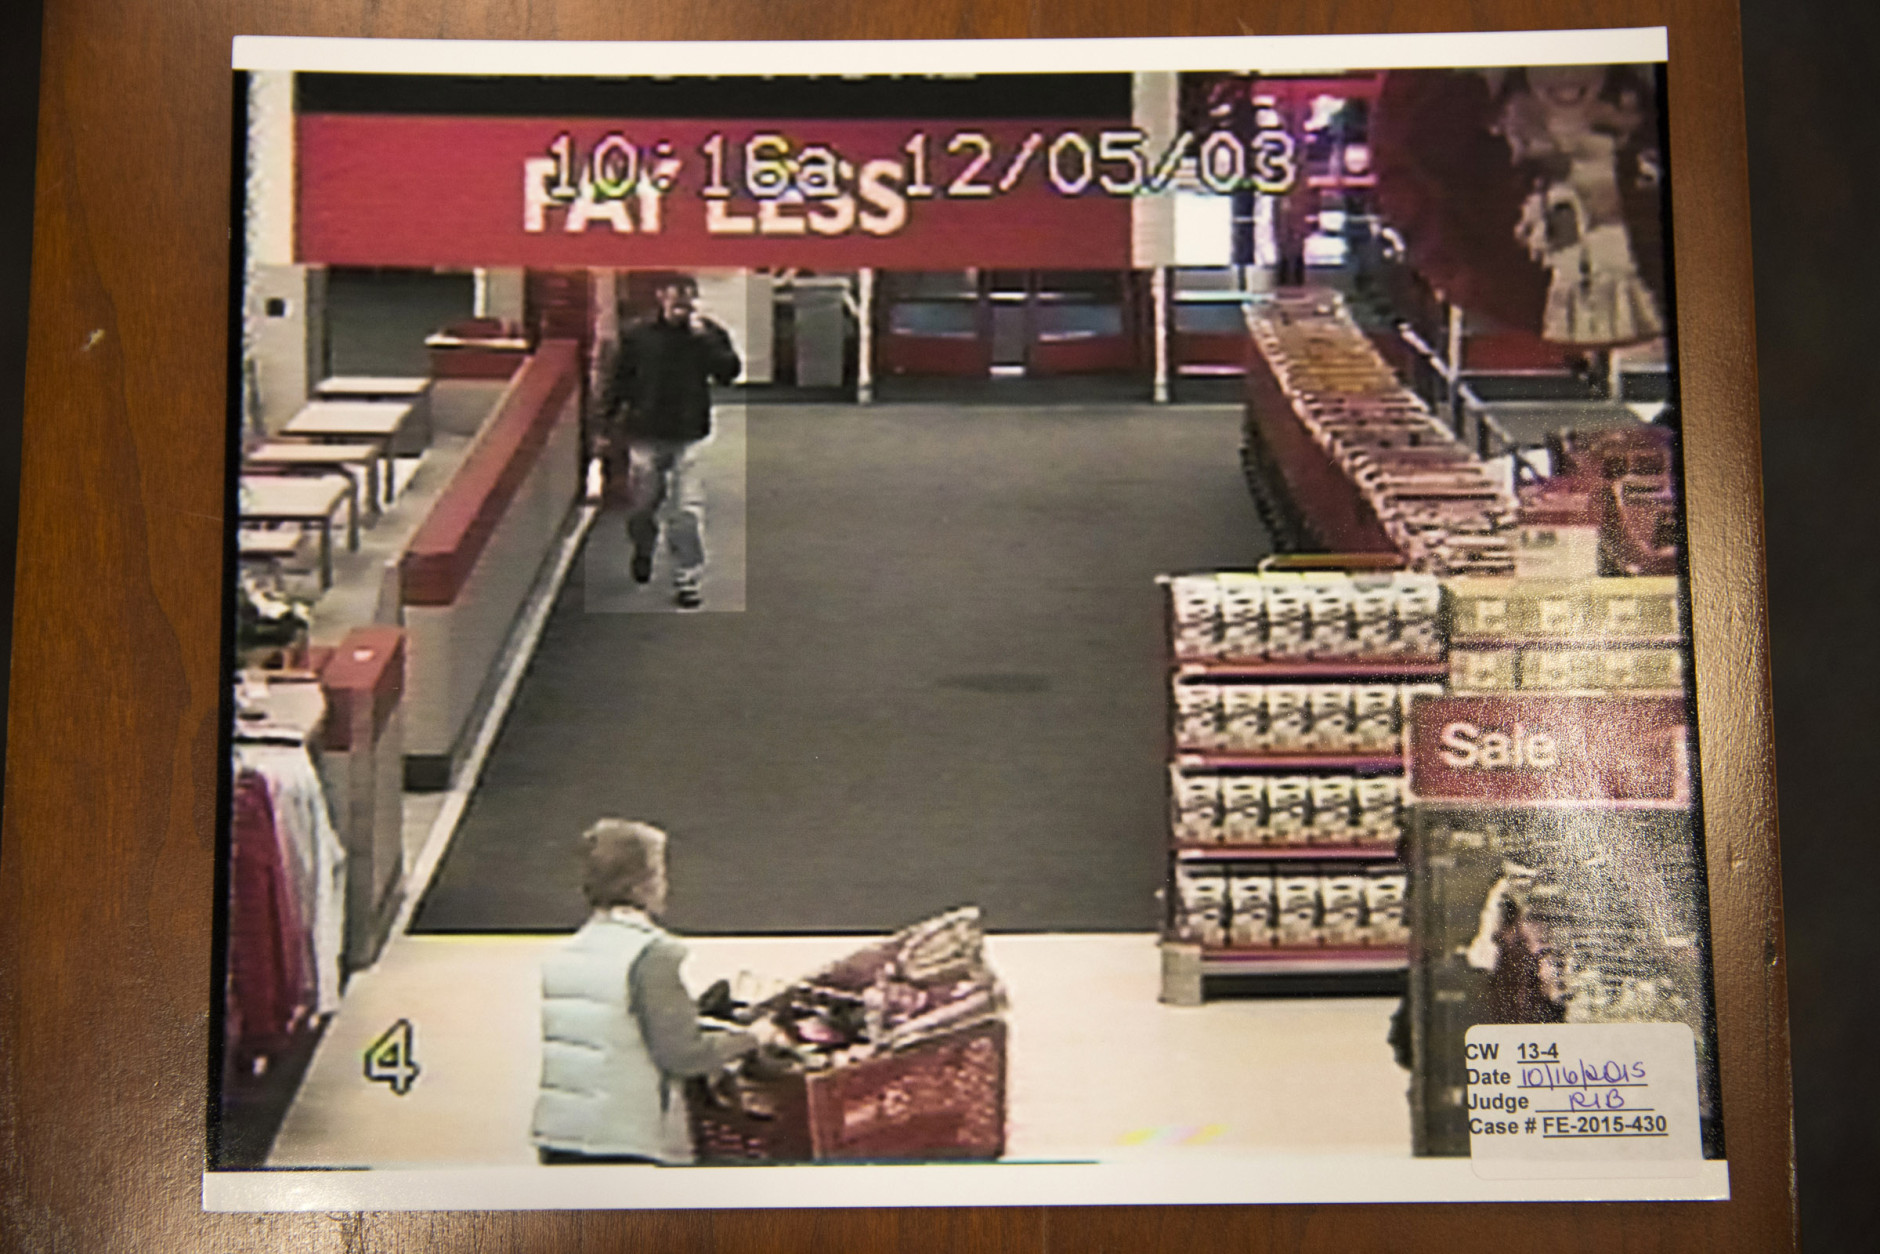 A freeze frame from a surveillance video of Nancy Dunning, lower left, and a person of interest inside a Target store the day of Dunning's murder is photographed during the Charles Severance murder trial  at the Fairfax County Circuit Court in Fairfax, Va., Friday, Oct. 16, 2015.  Severance is accused of three murders over the course of a decade in Alexandria, Va. (AP Photo/Evan Vucci, Pool)